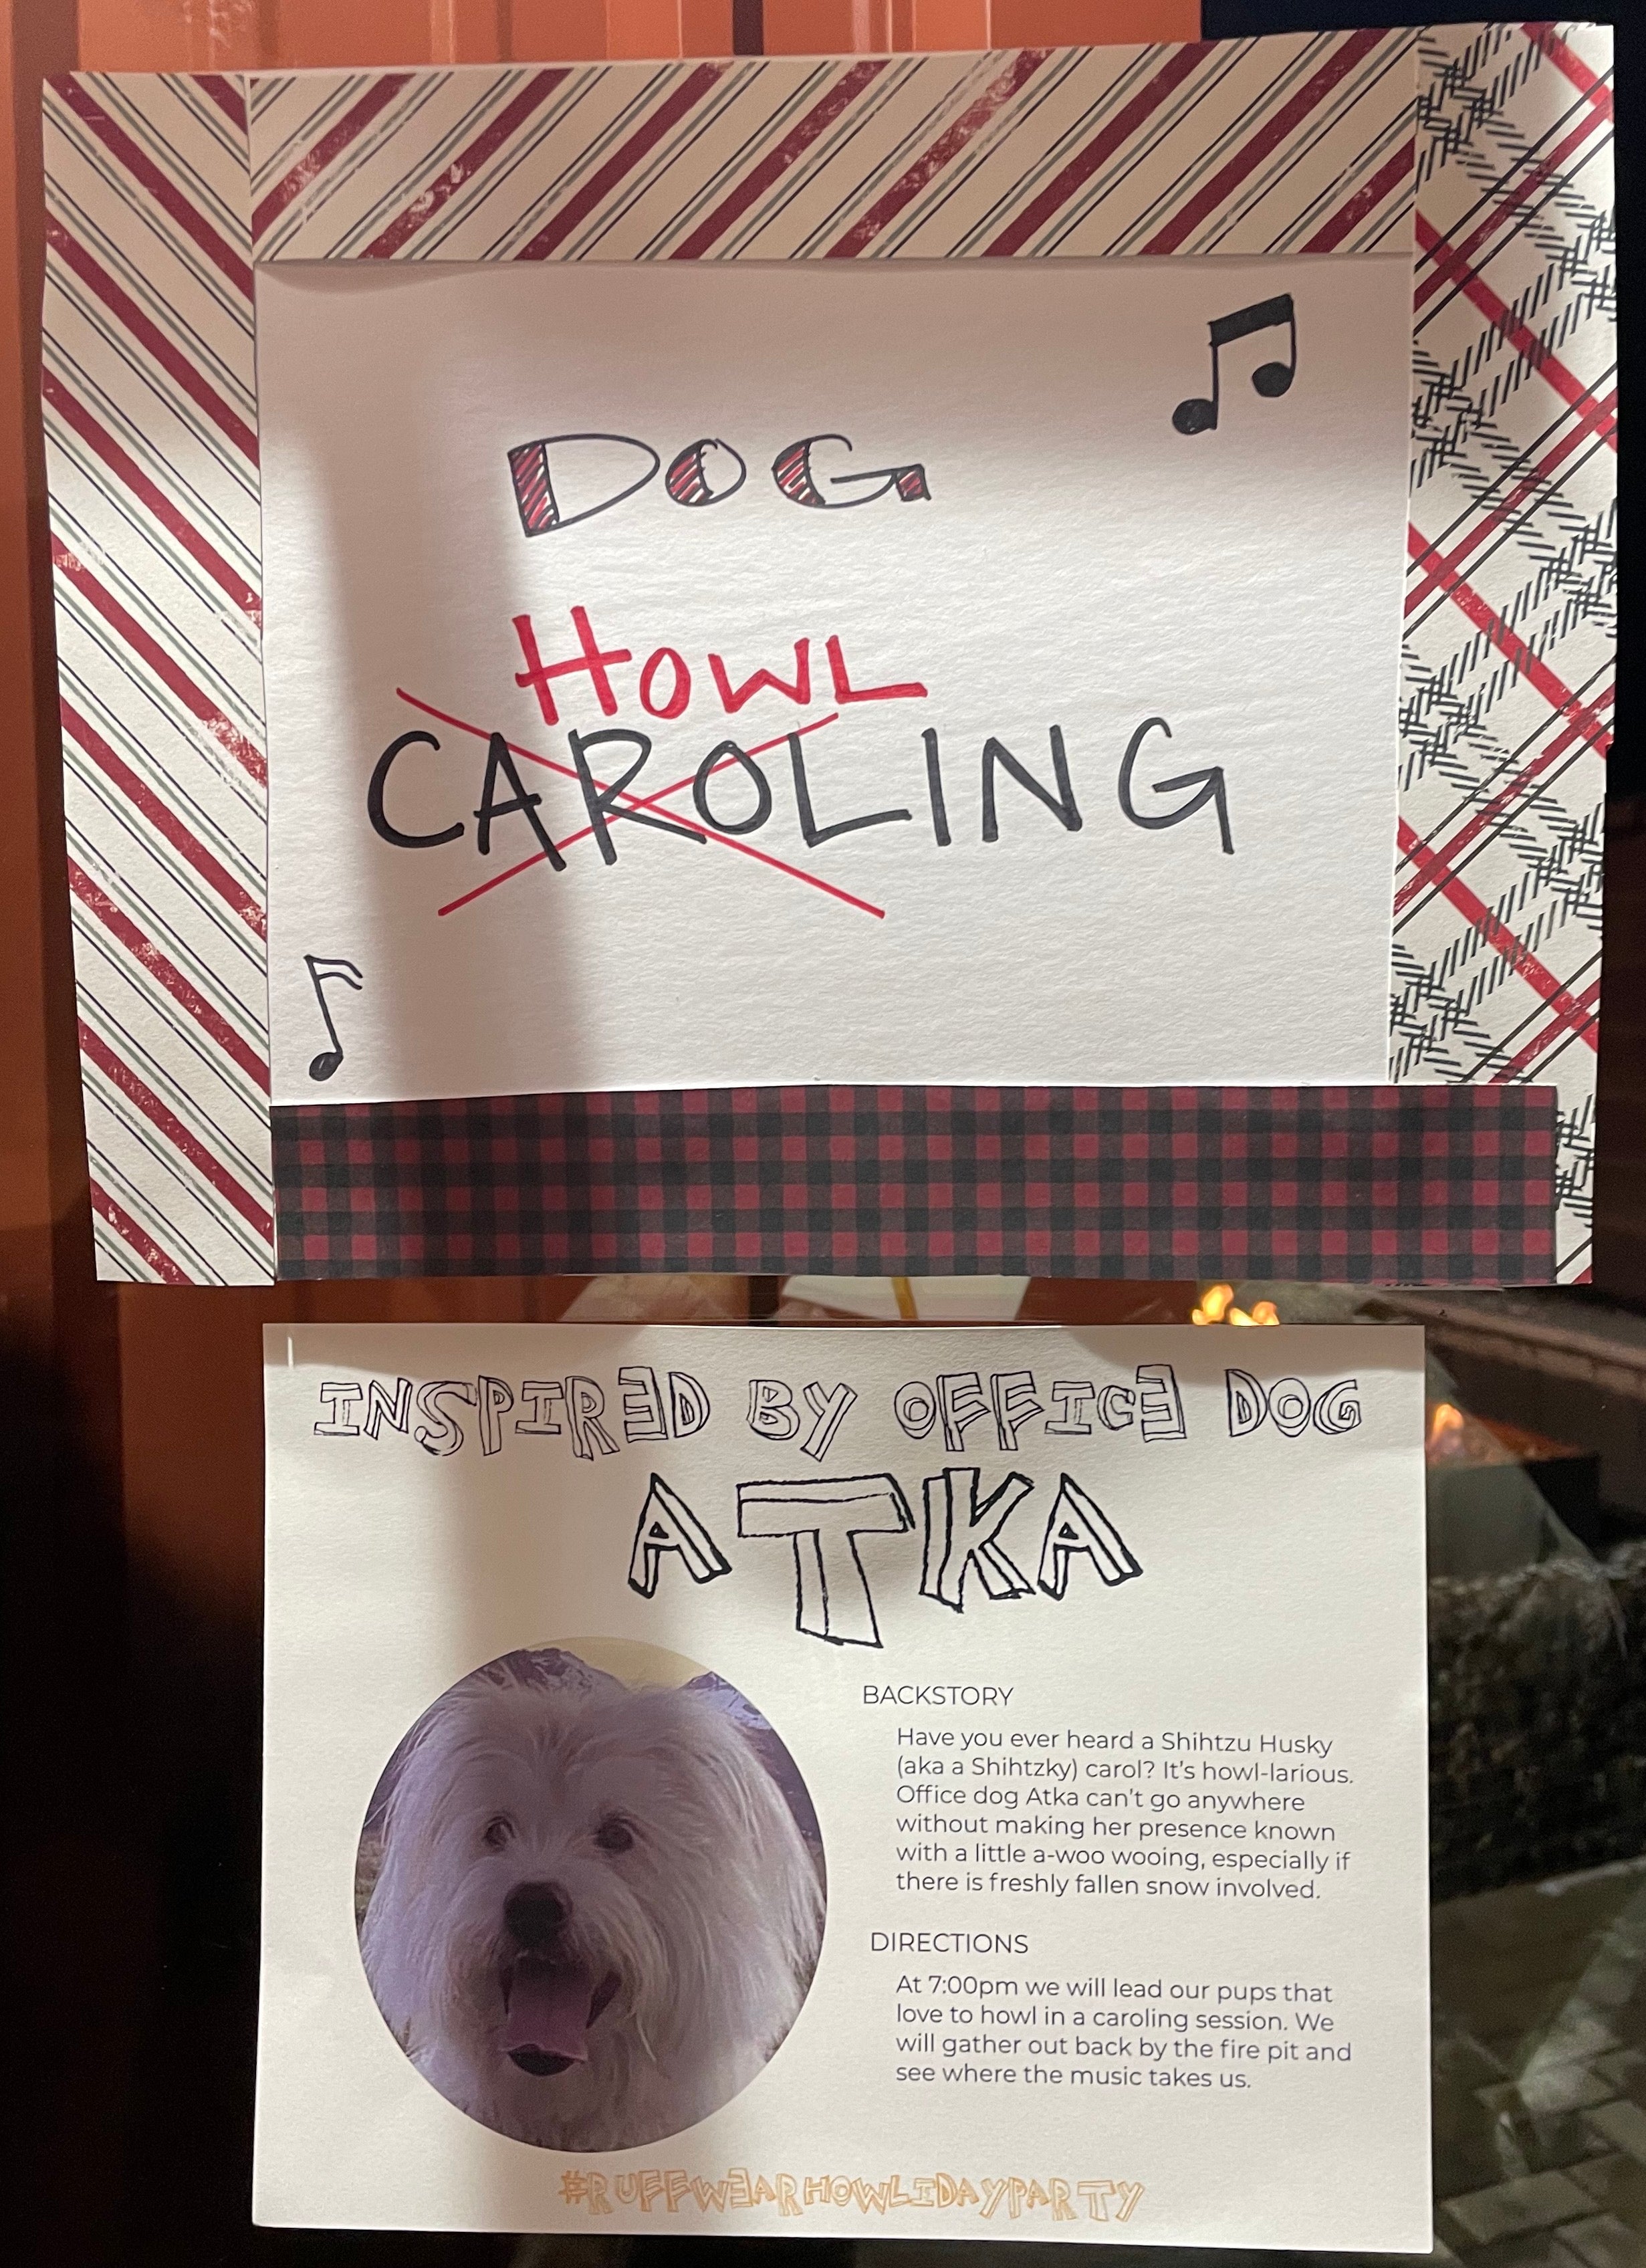 A sign for the dog howling event.